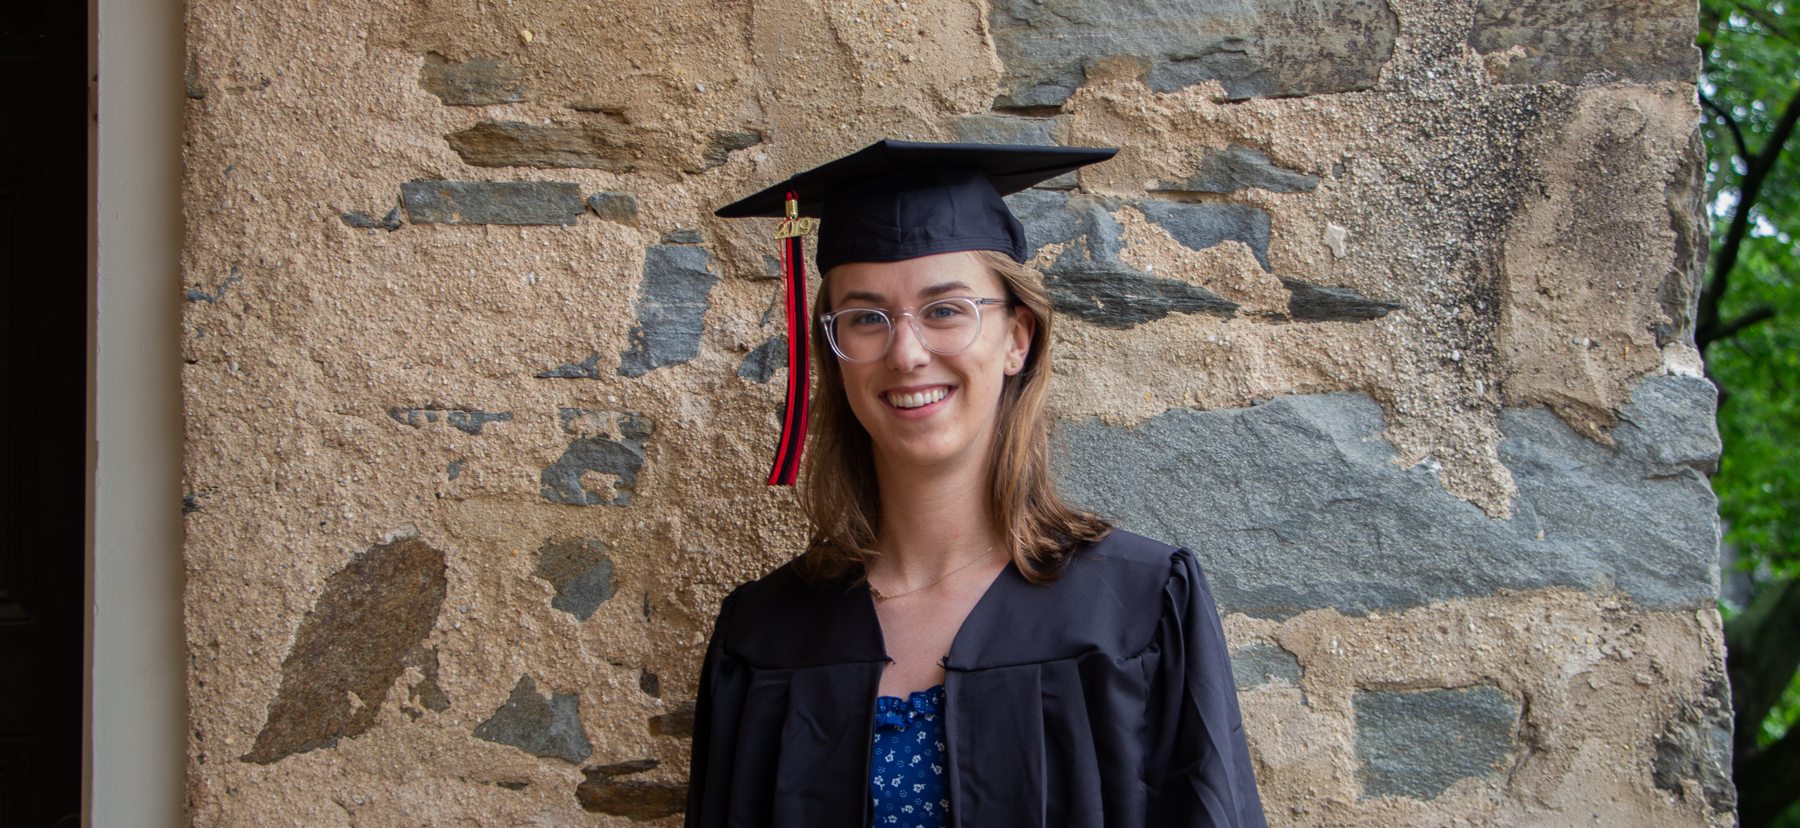 Woman in graduation gown smiles in front of stone wall